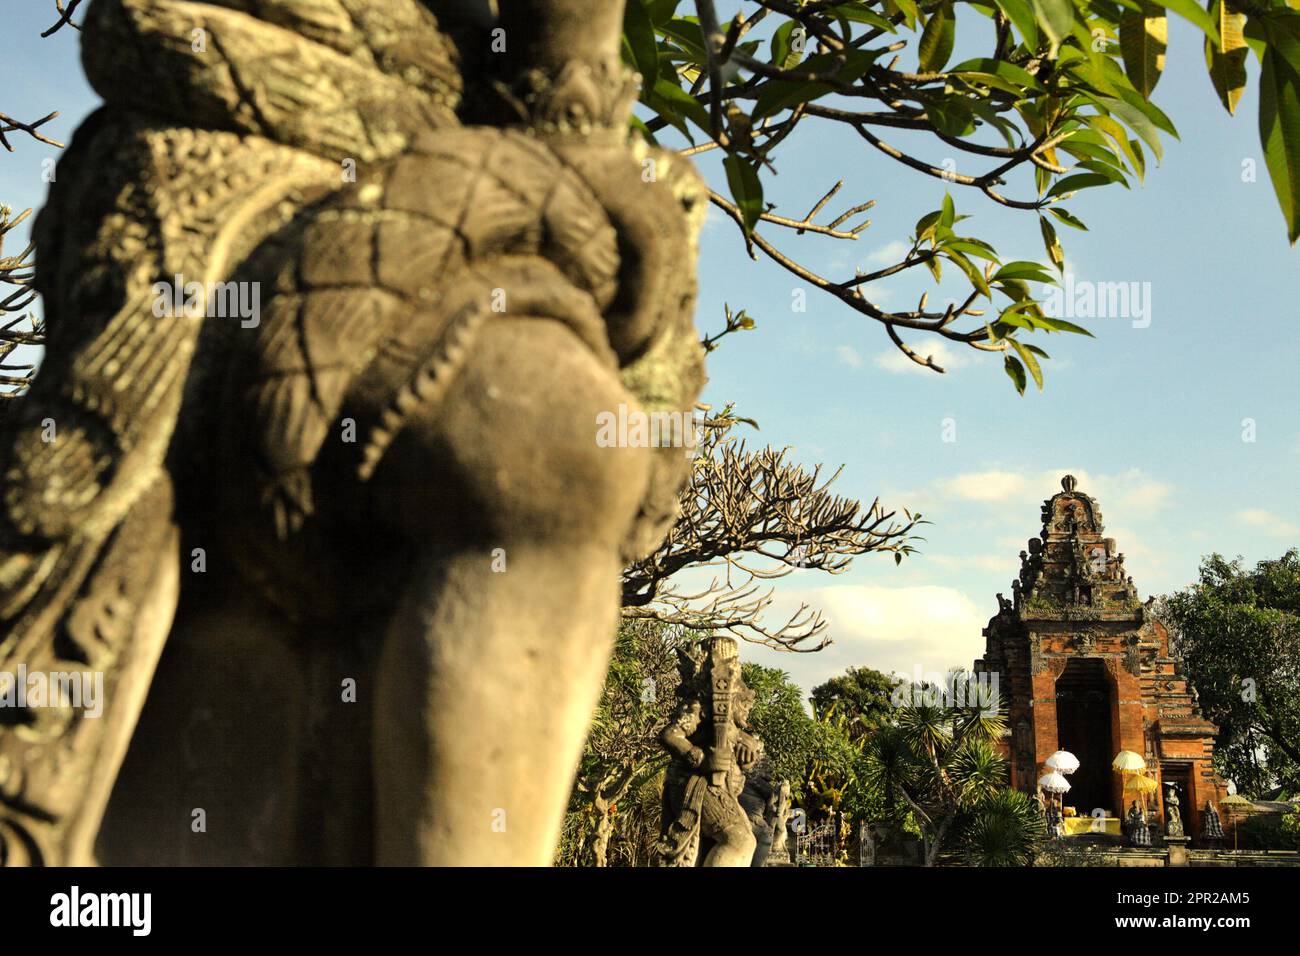 Decorative sculptures and a temple near Kertha Gosa pavilion (Bale Kambang), in the area of the abolished Klungkung Palace complex in Semarapura, Klungkung, Bali, Indonesia. Stock Photo